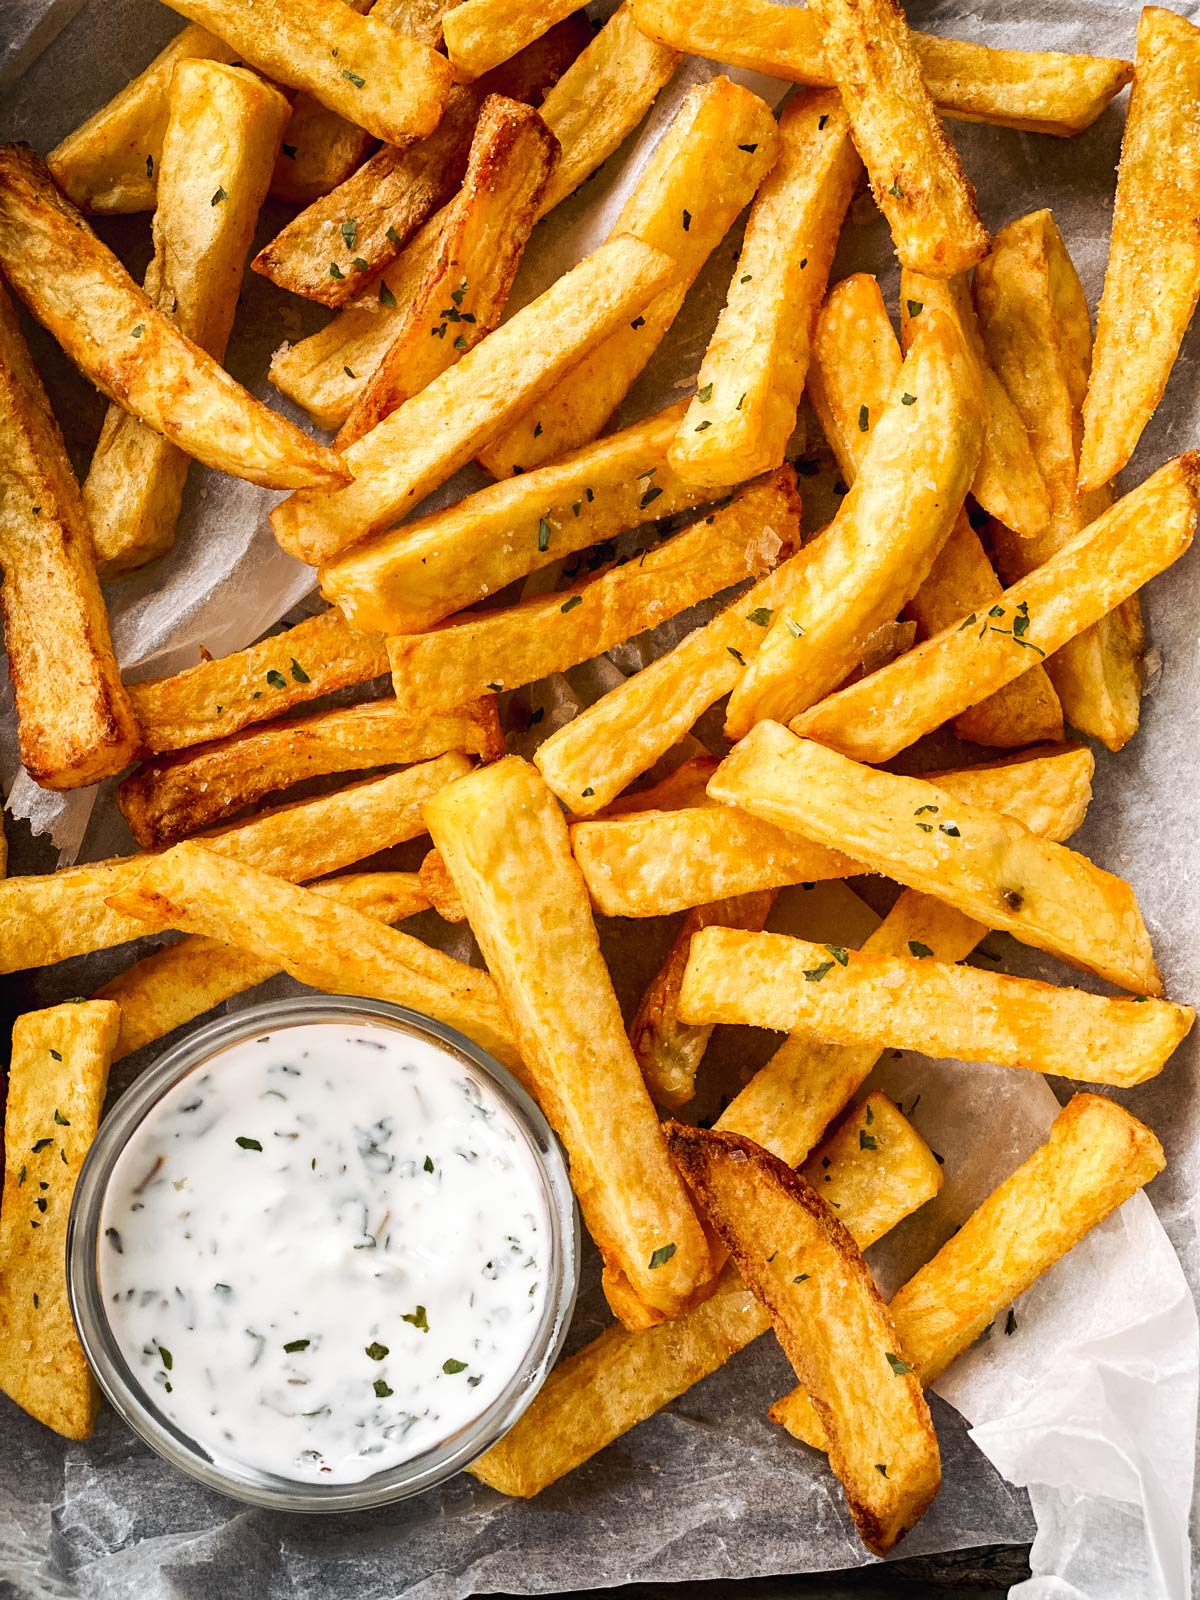 https://www.wholesomerecipebox.com/wp-content/uploads/2021/01/air-fryer-french-fries-image-12.jpg